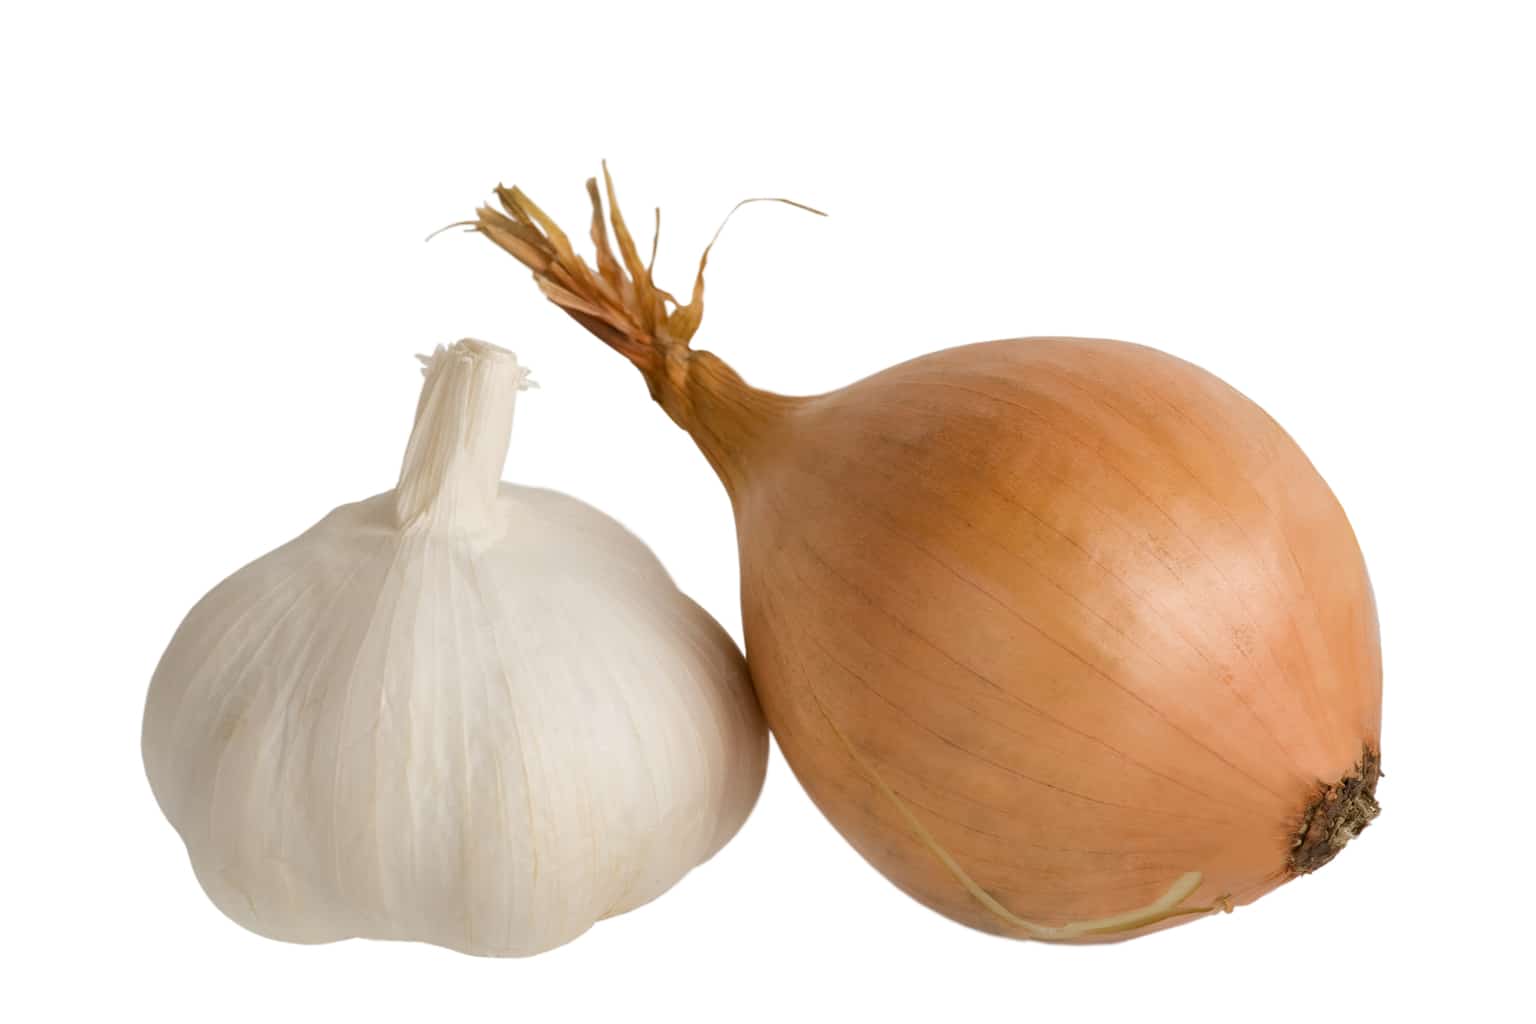 Garlic and onions protect you when you cook with oil